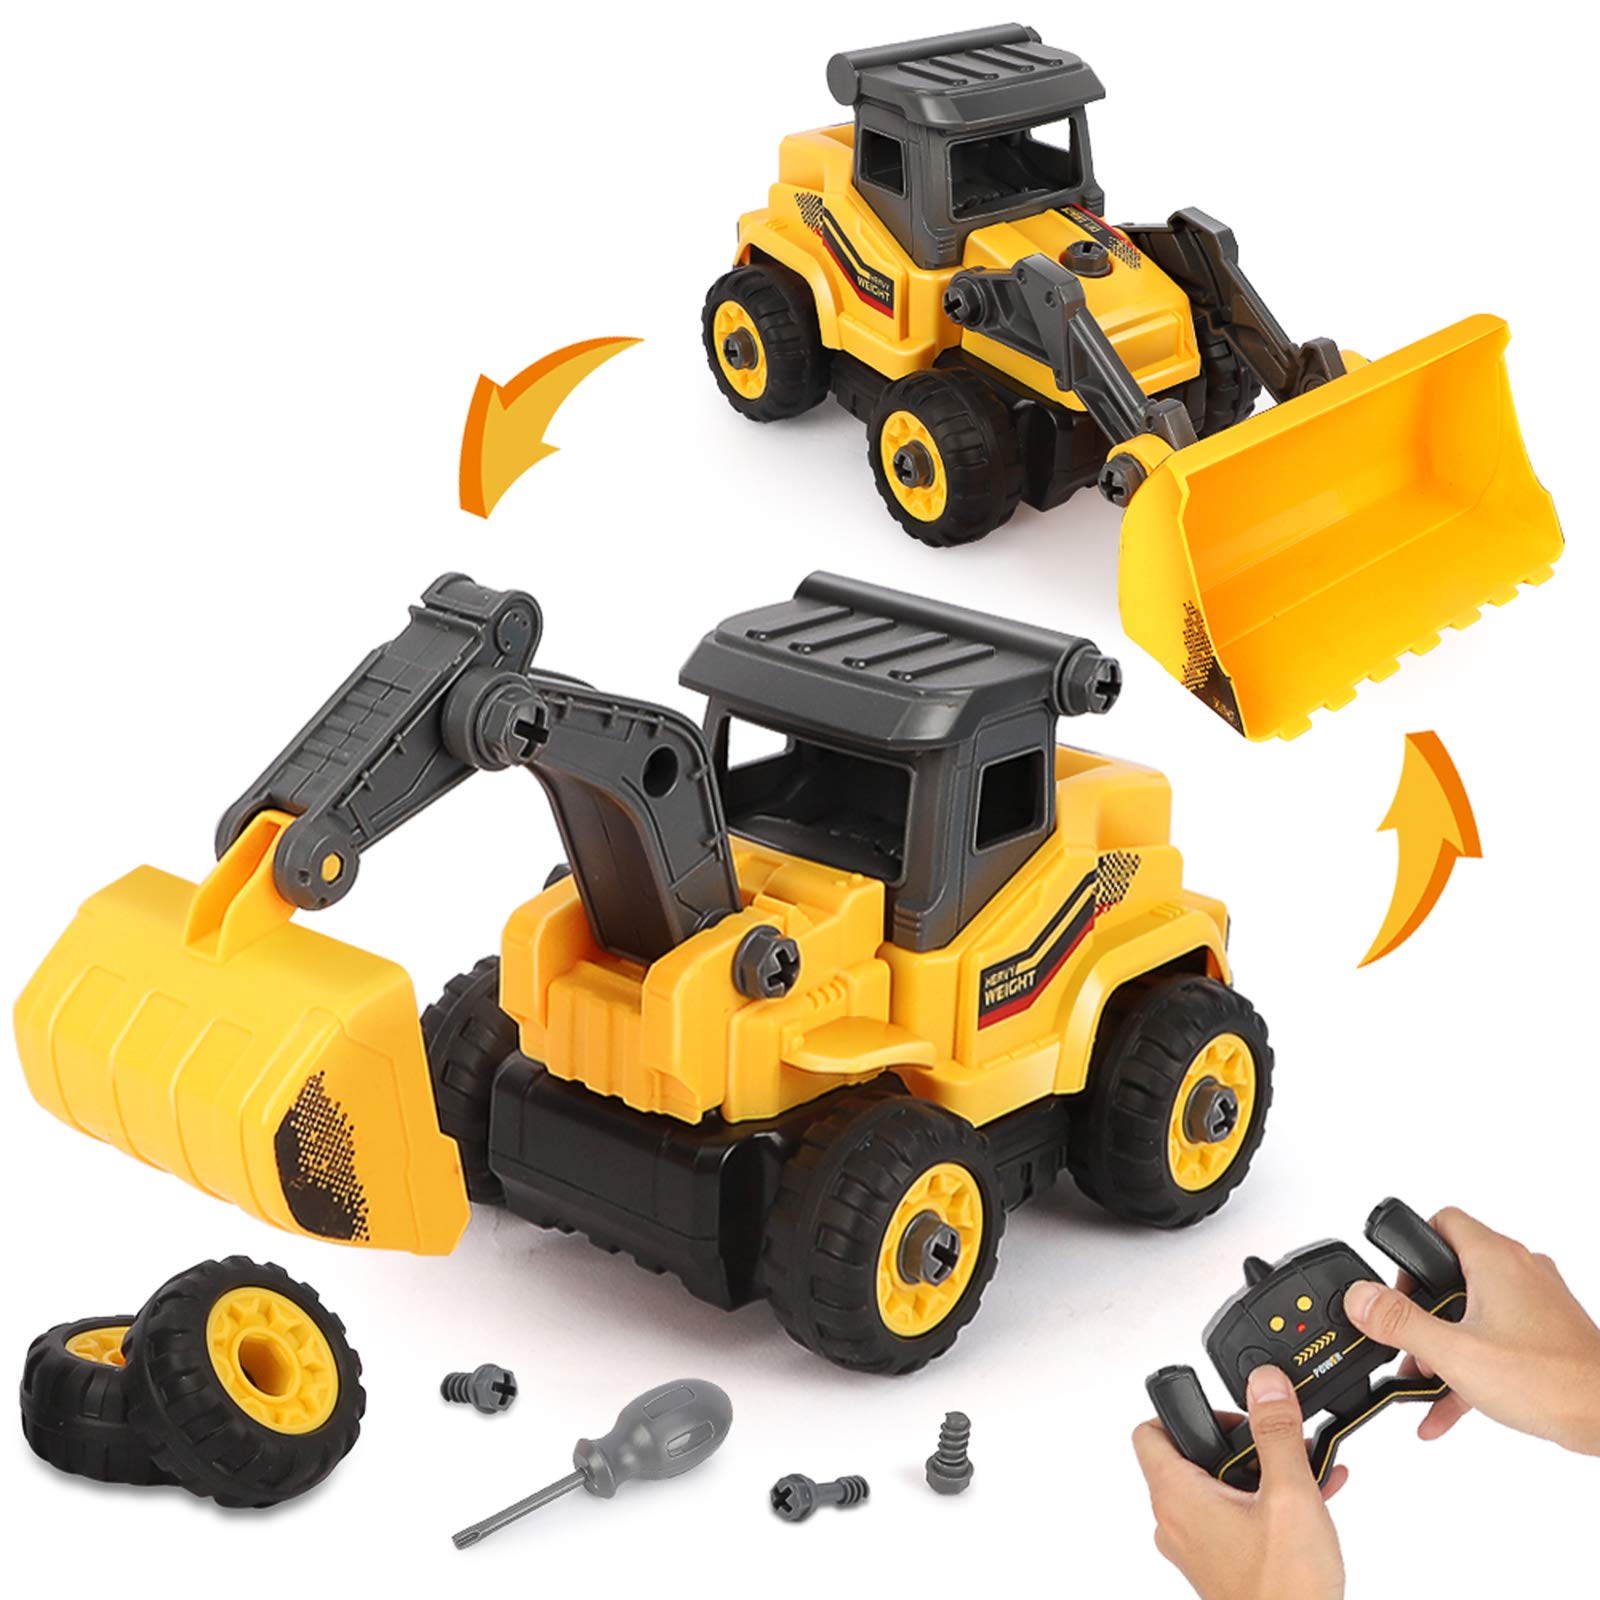 Hot New Products Bulldozing Toy Vehicles - BeebeeRun Take Apart Construction Toys – Construction Trucks for Boys – 2 in 1 RC Construction Vehicles – Remote Control Excavator and ...